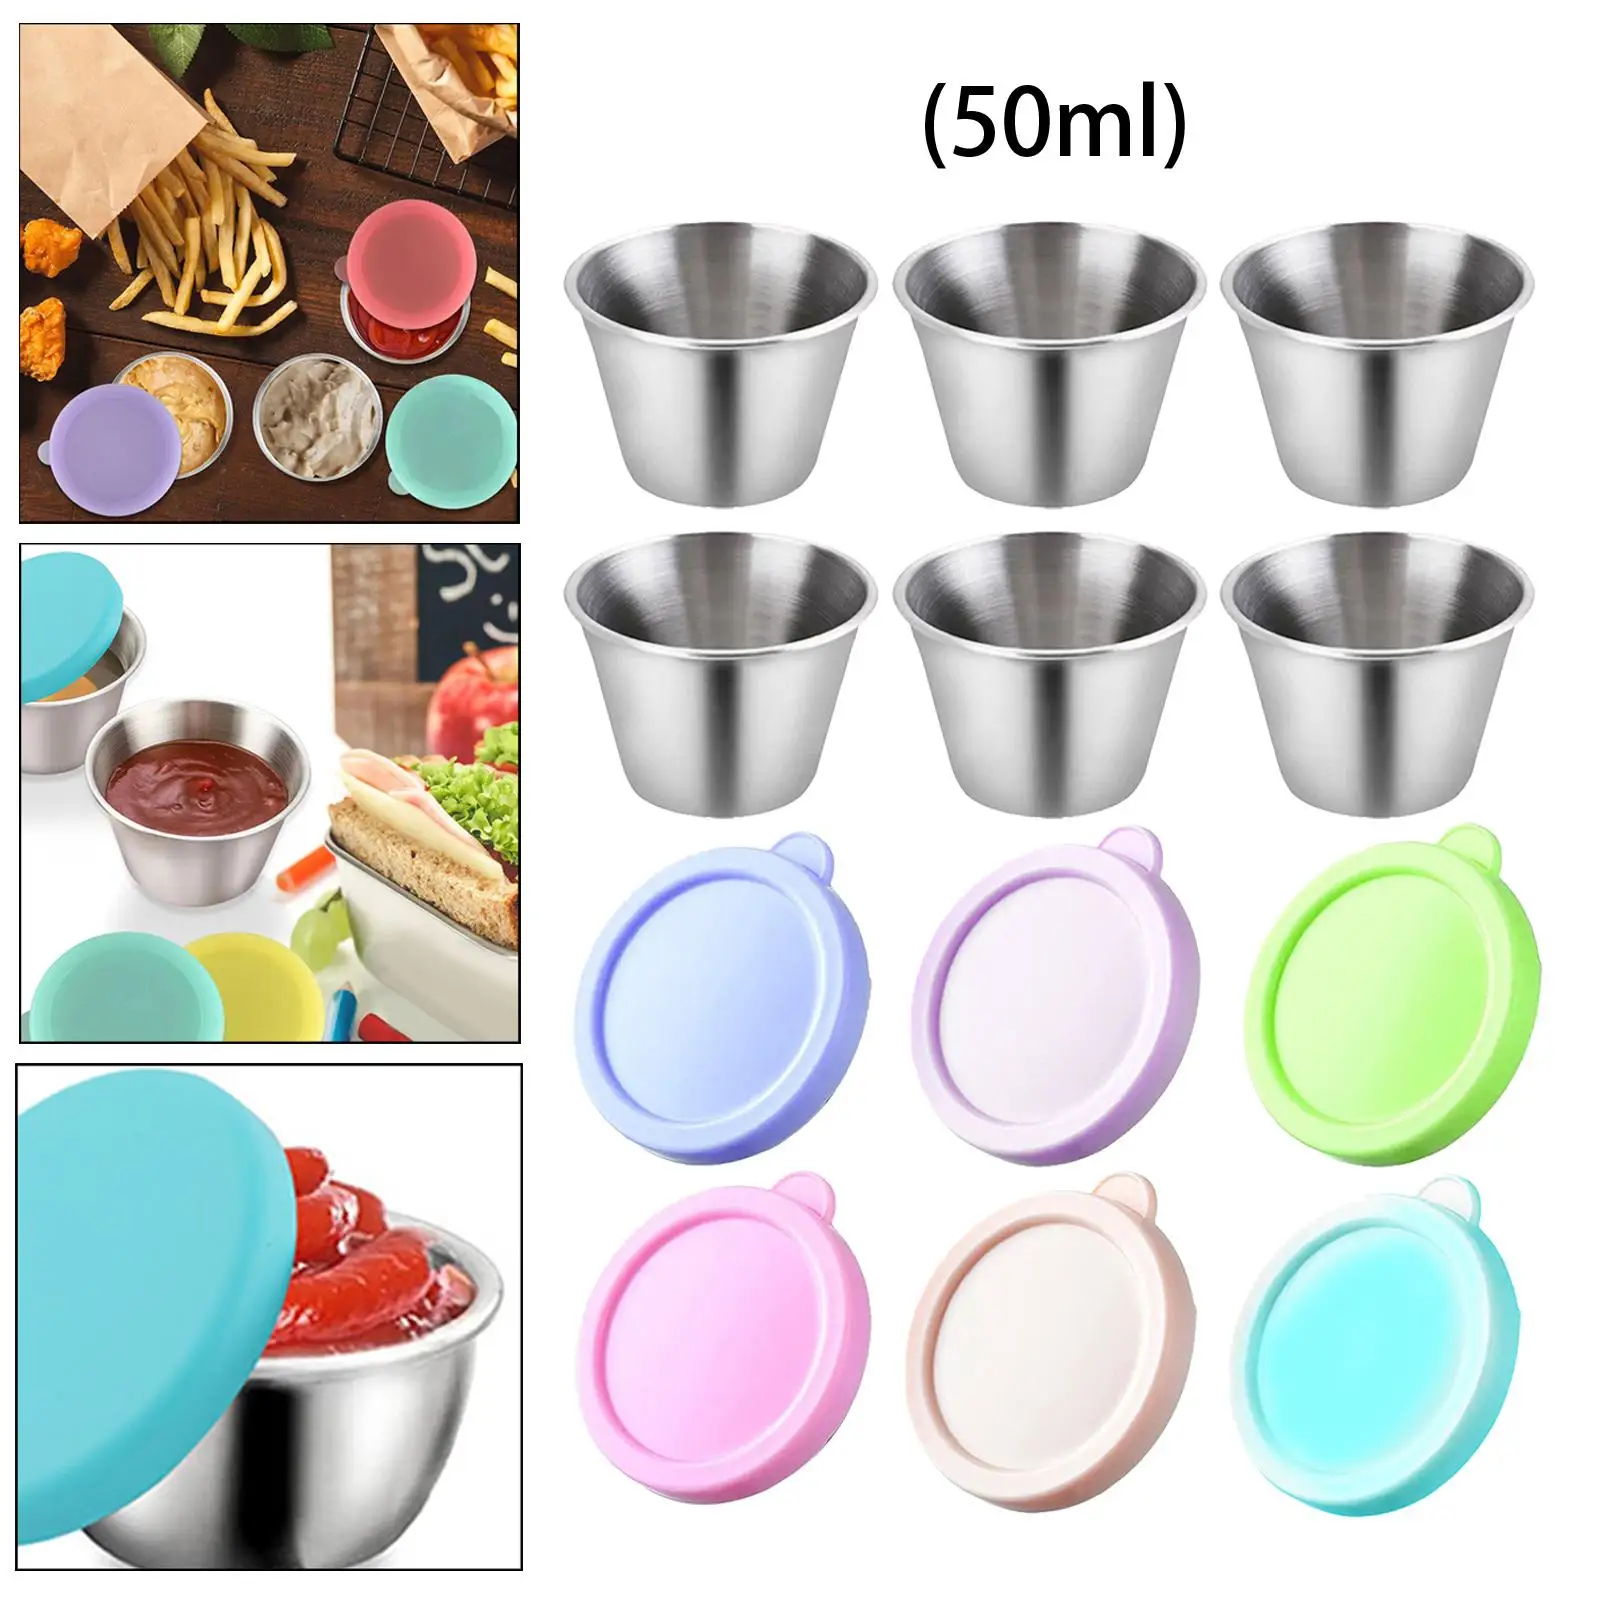 Multifunctional Vinegar Sauce Cup Saucepan Condiment Containers for Tea Sauces Melting Chocolate Fries Dipping Sauce